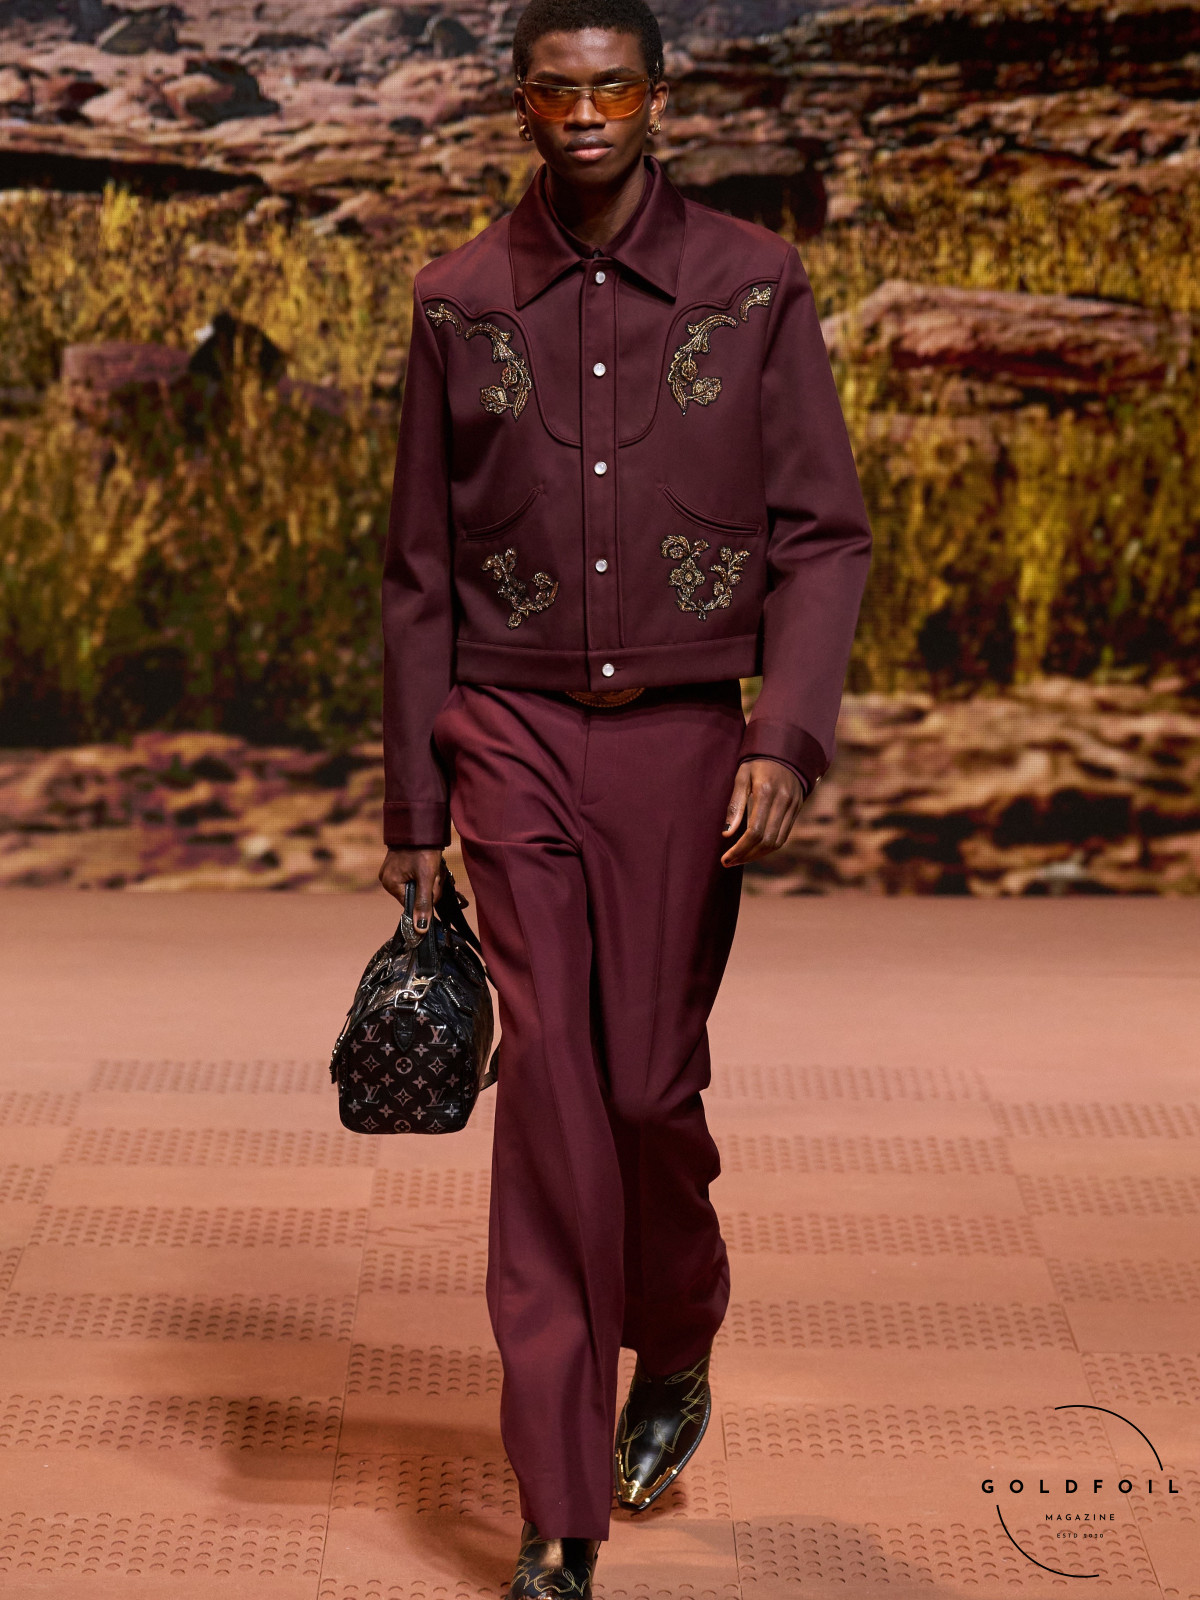 Louis Vuitton runway model wearing a red embroidered jacket and red relaxed trousers with ornamented boots and a monogram black leather bag